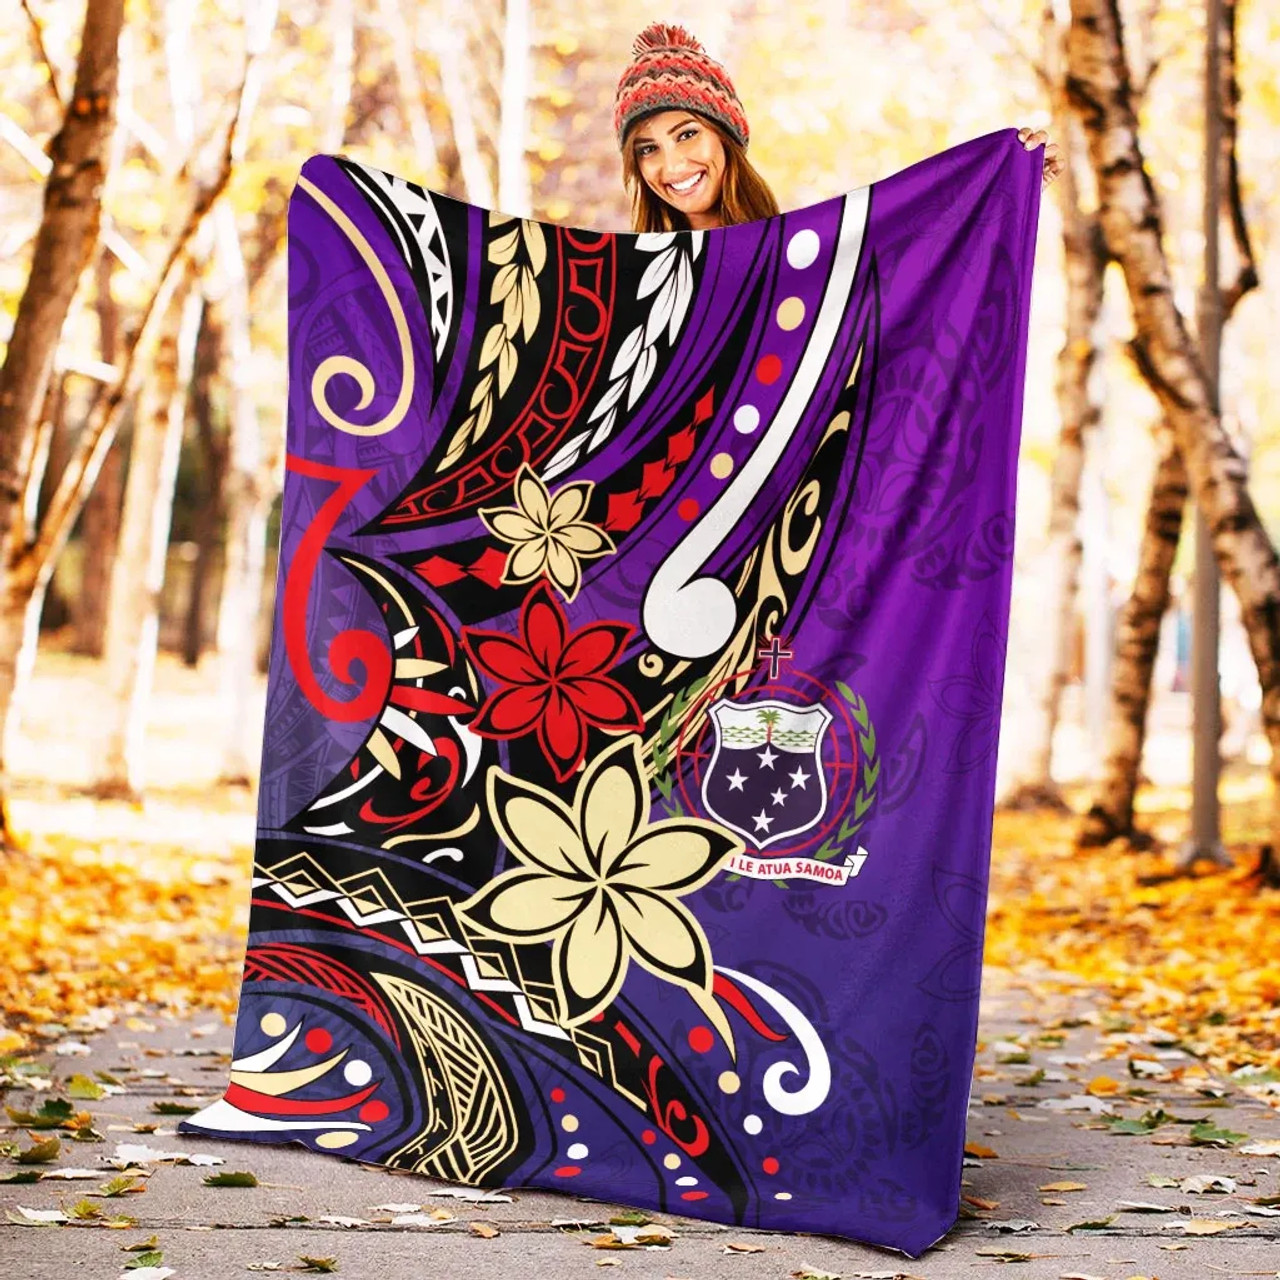 Samoa Premium Blanket - Tribal Flower With Special Turtles Purple Color 4